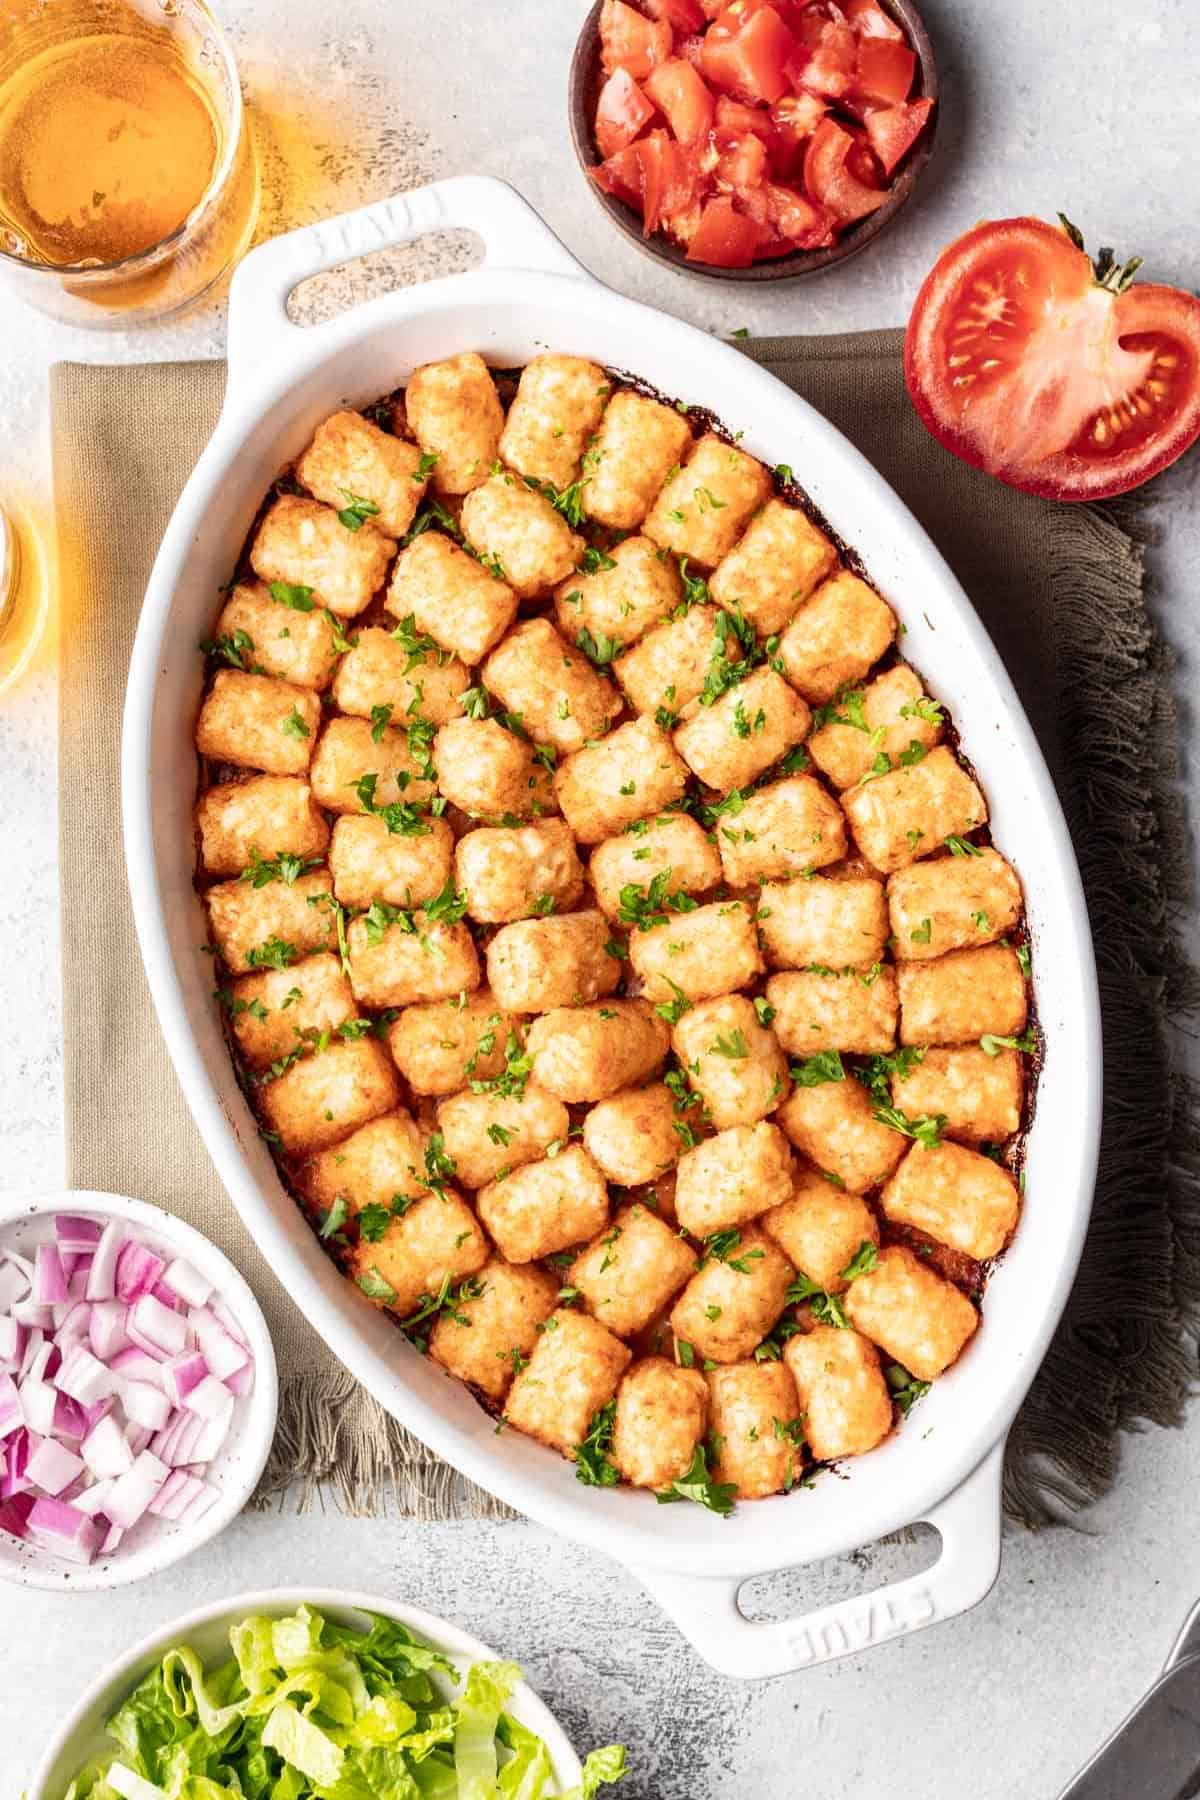 Cheeseburger tater tot casserole in an oval baking dish with tater tots placed in concentric circles on top.